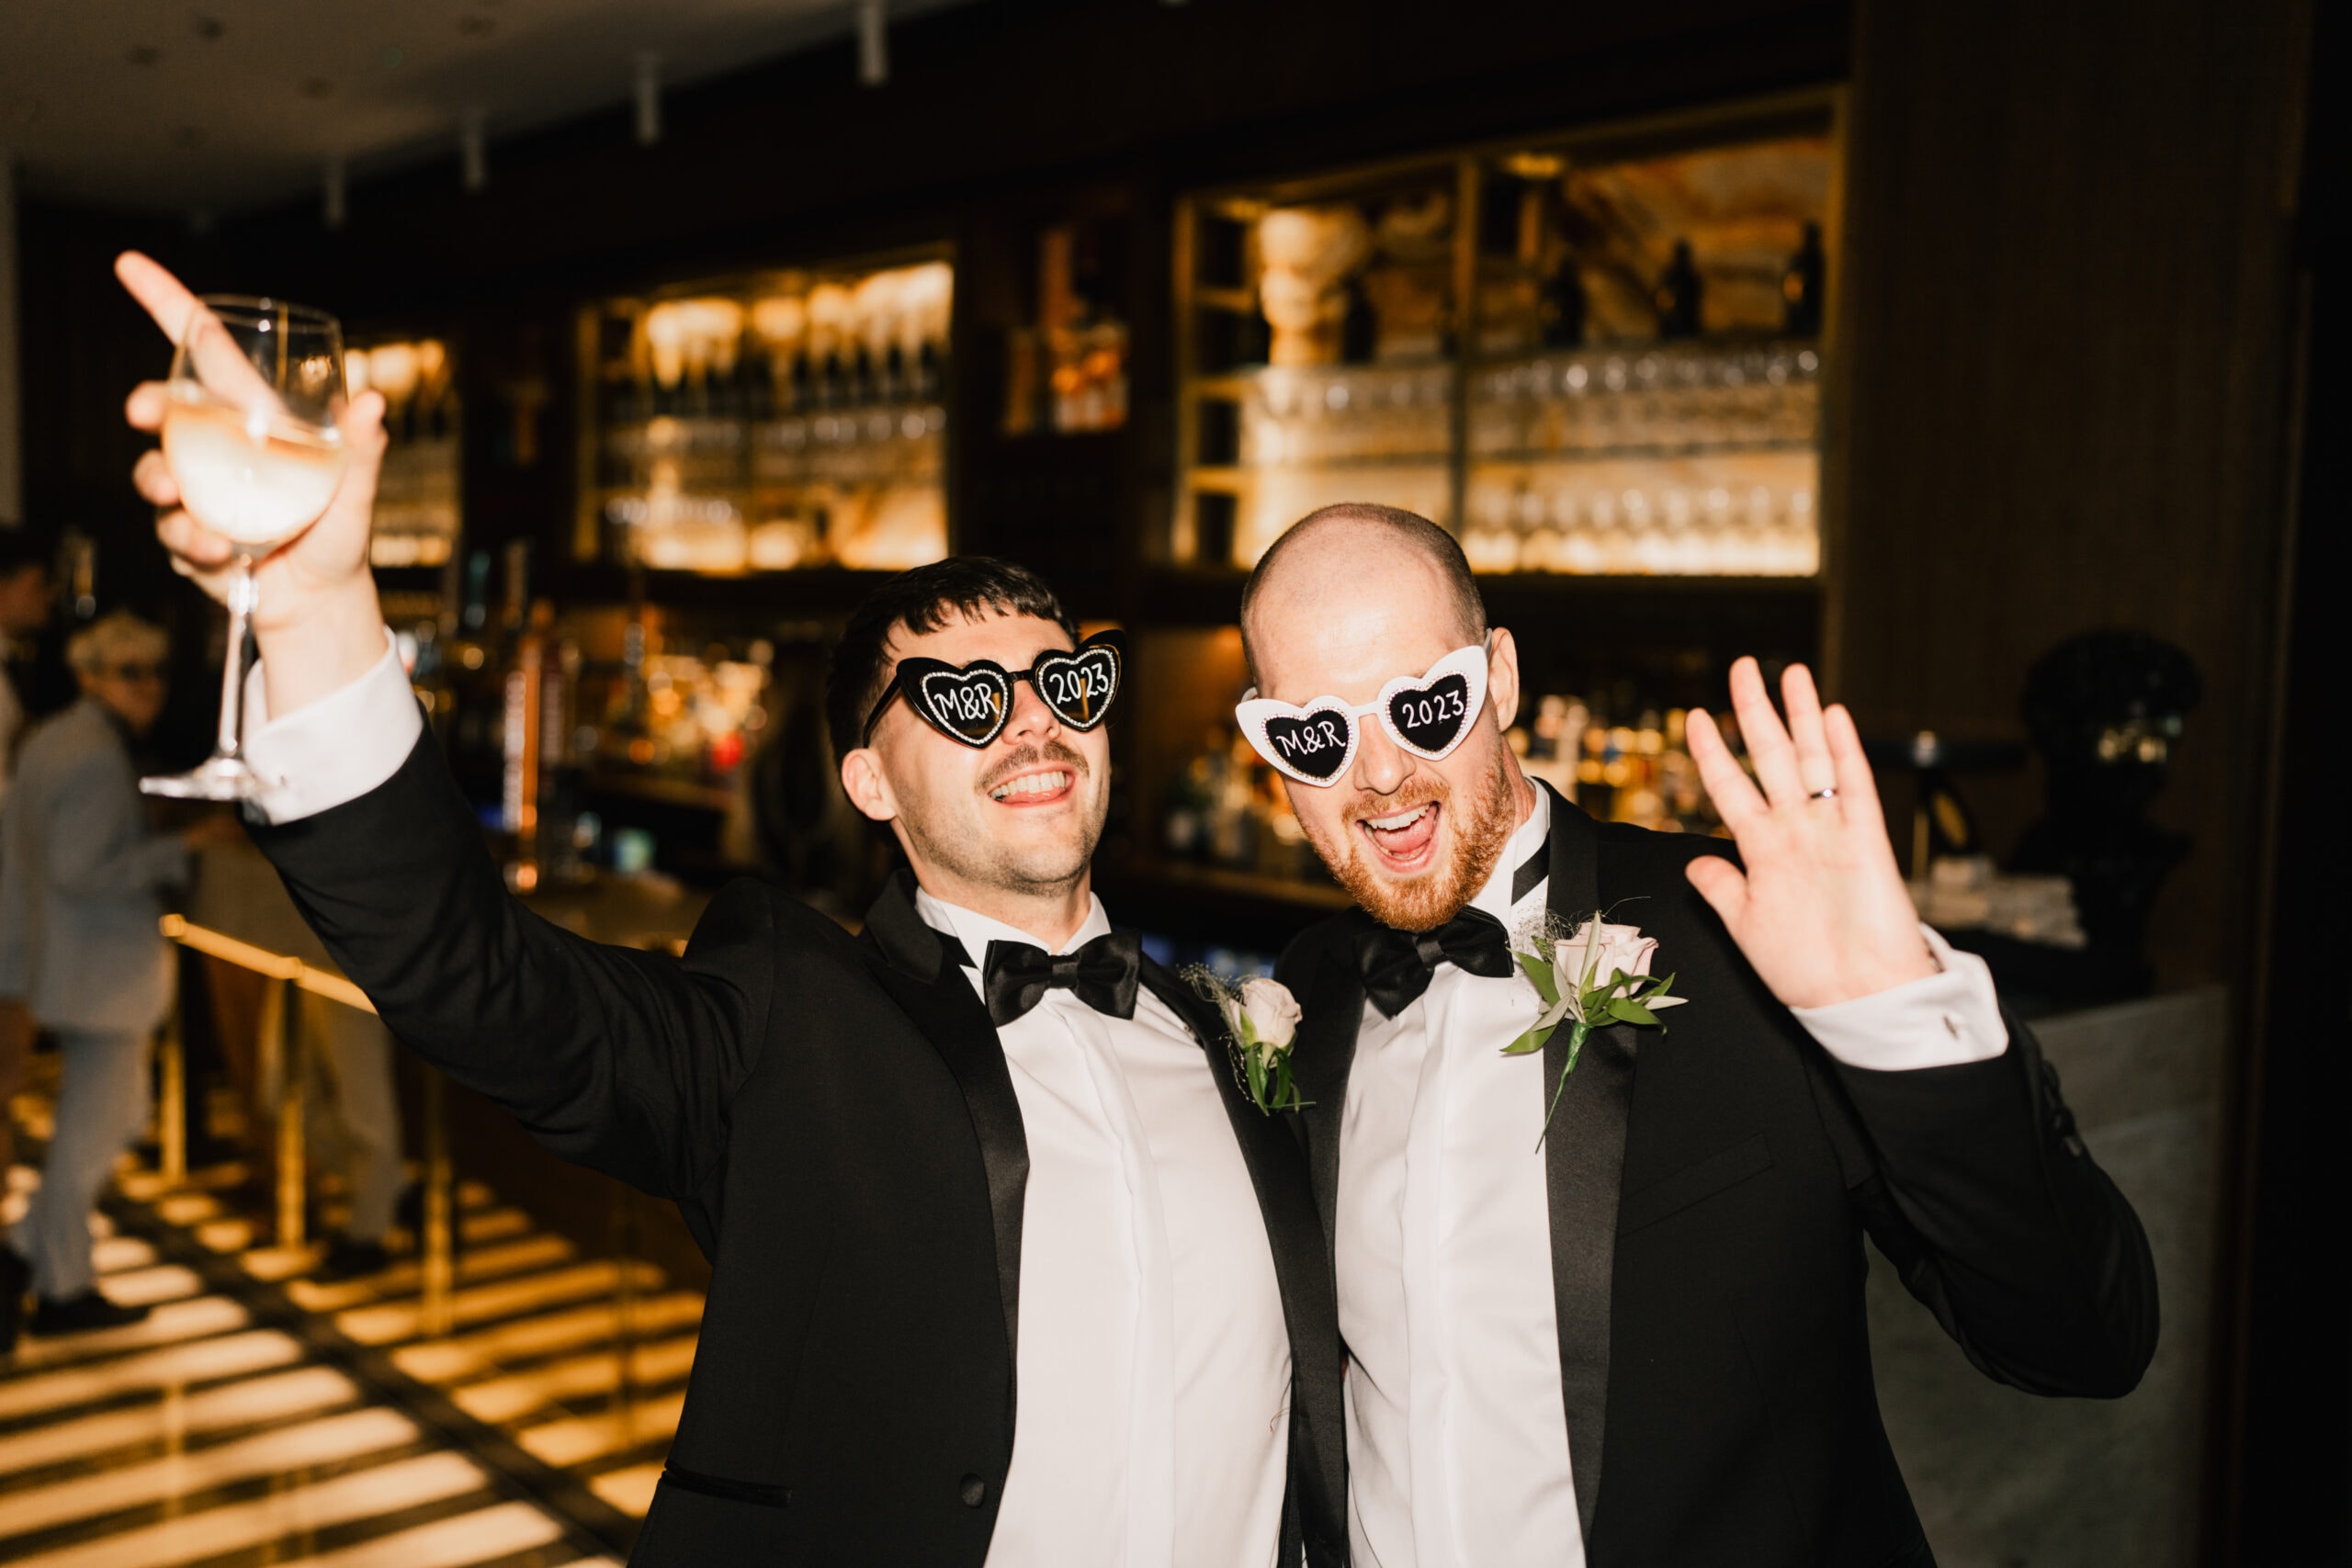 Two men in tuxedos at a celebration, wearing sunglasses shaped like "2024". they are smiling and taking a selfie, standing in a warmly lit venue with a bar in the background.